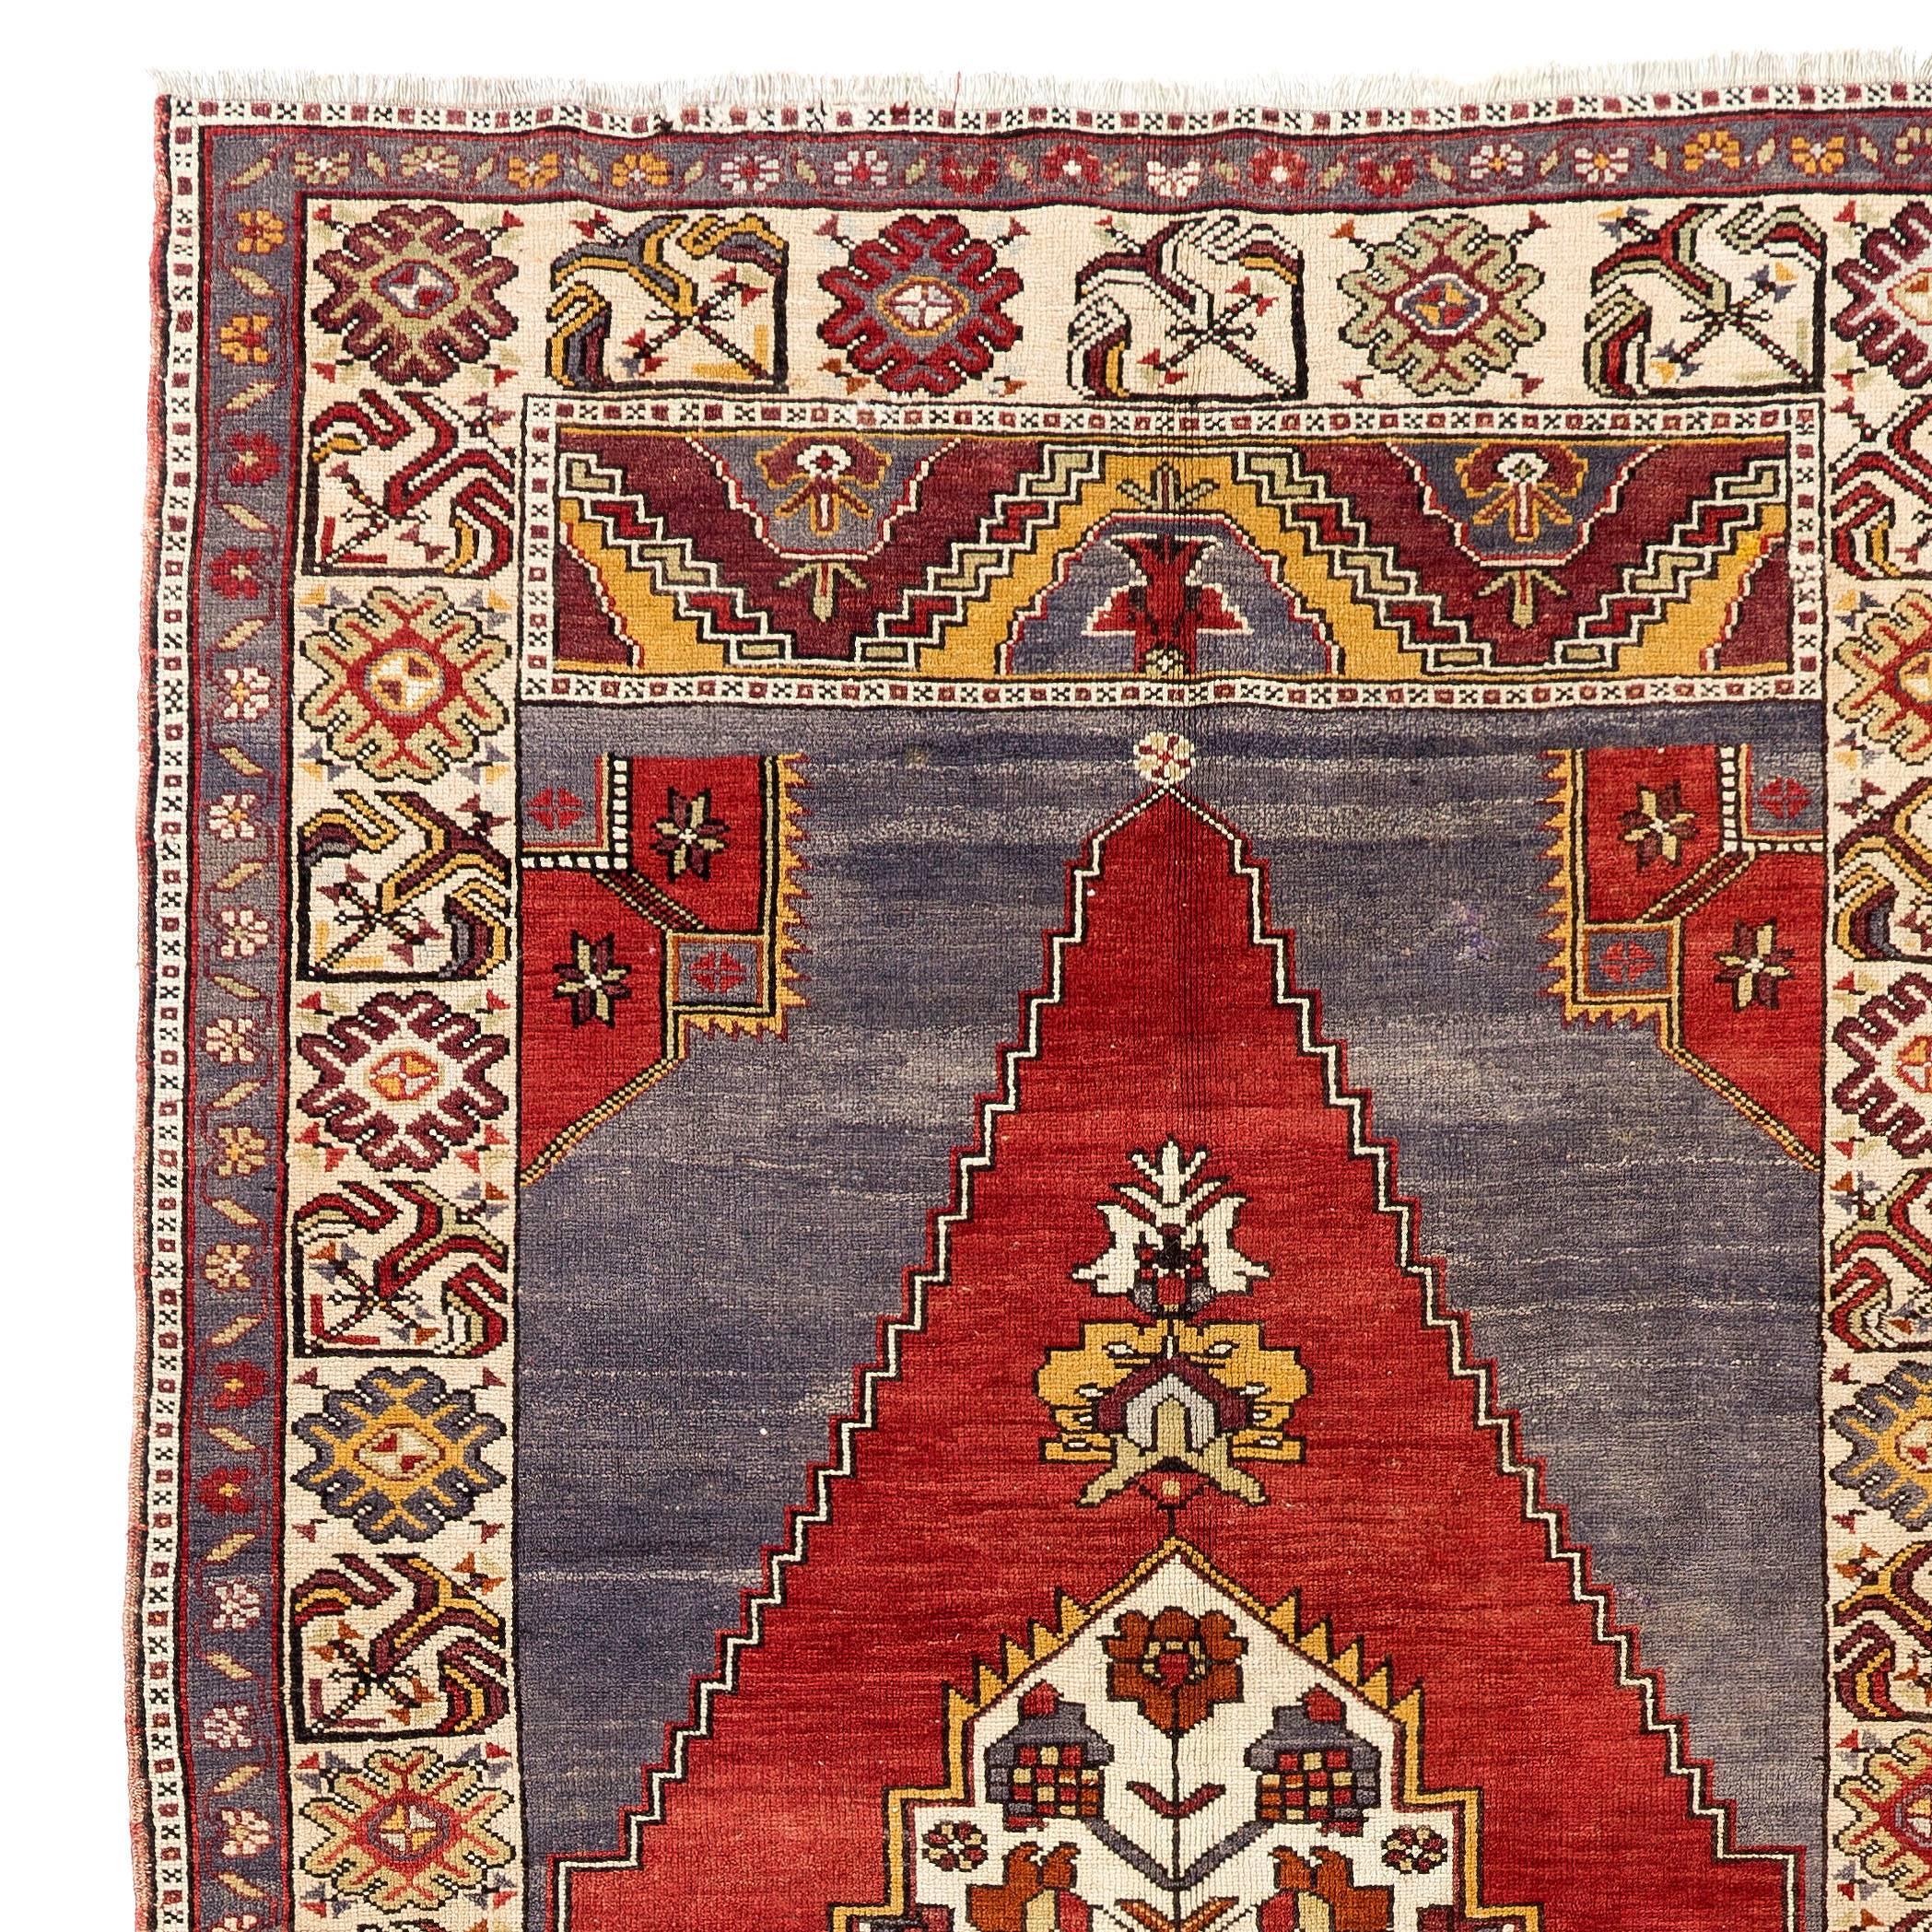 A vintage hand-knotted traditional village rug from Central Turkey. 100% soft lustrous wool.